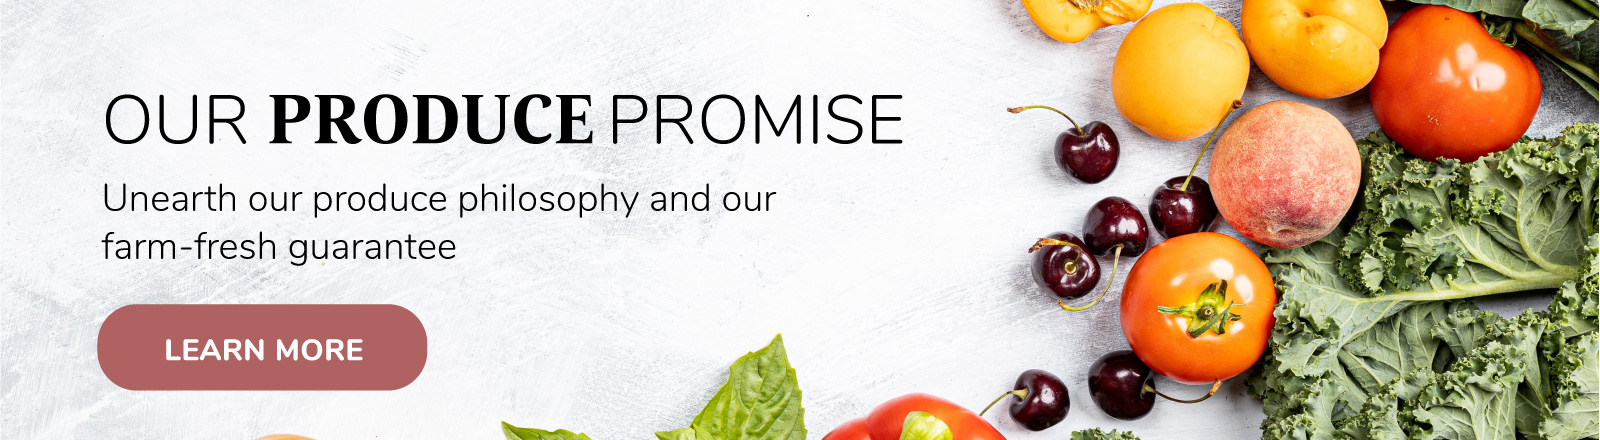 Our Produce Promise. Unearth our produce philosophy and our farm-fresh guarantee 